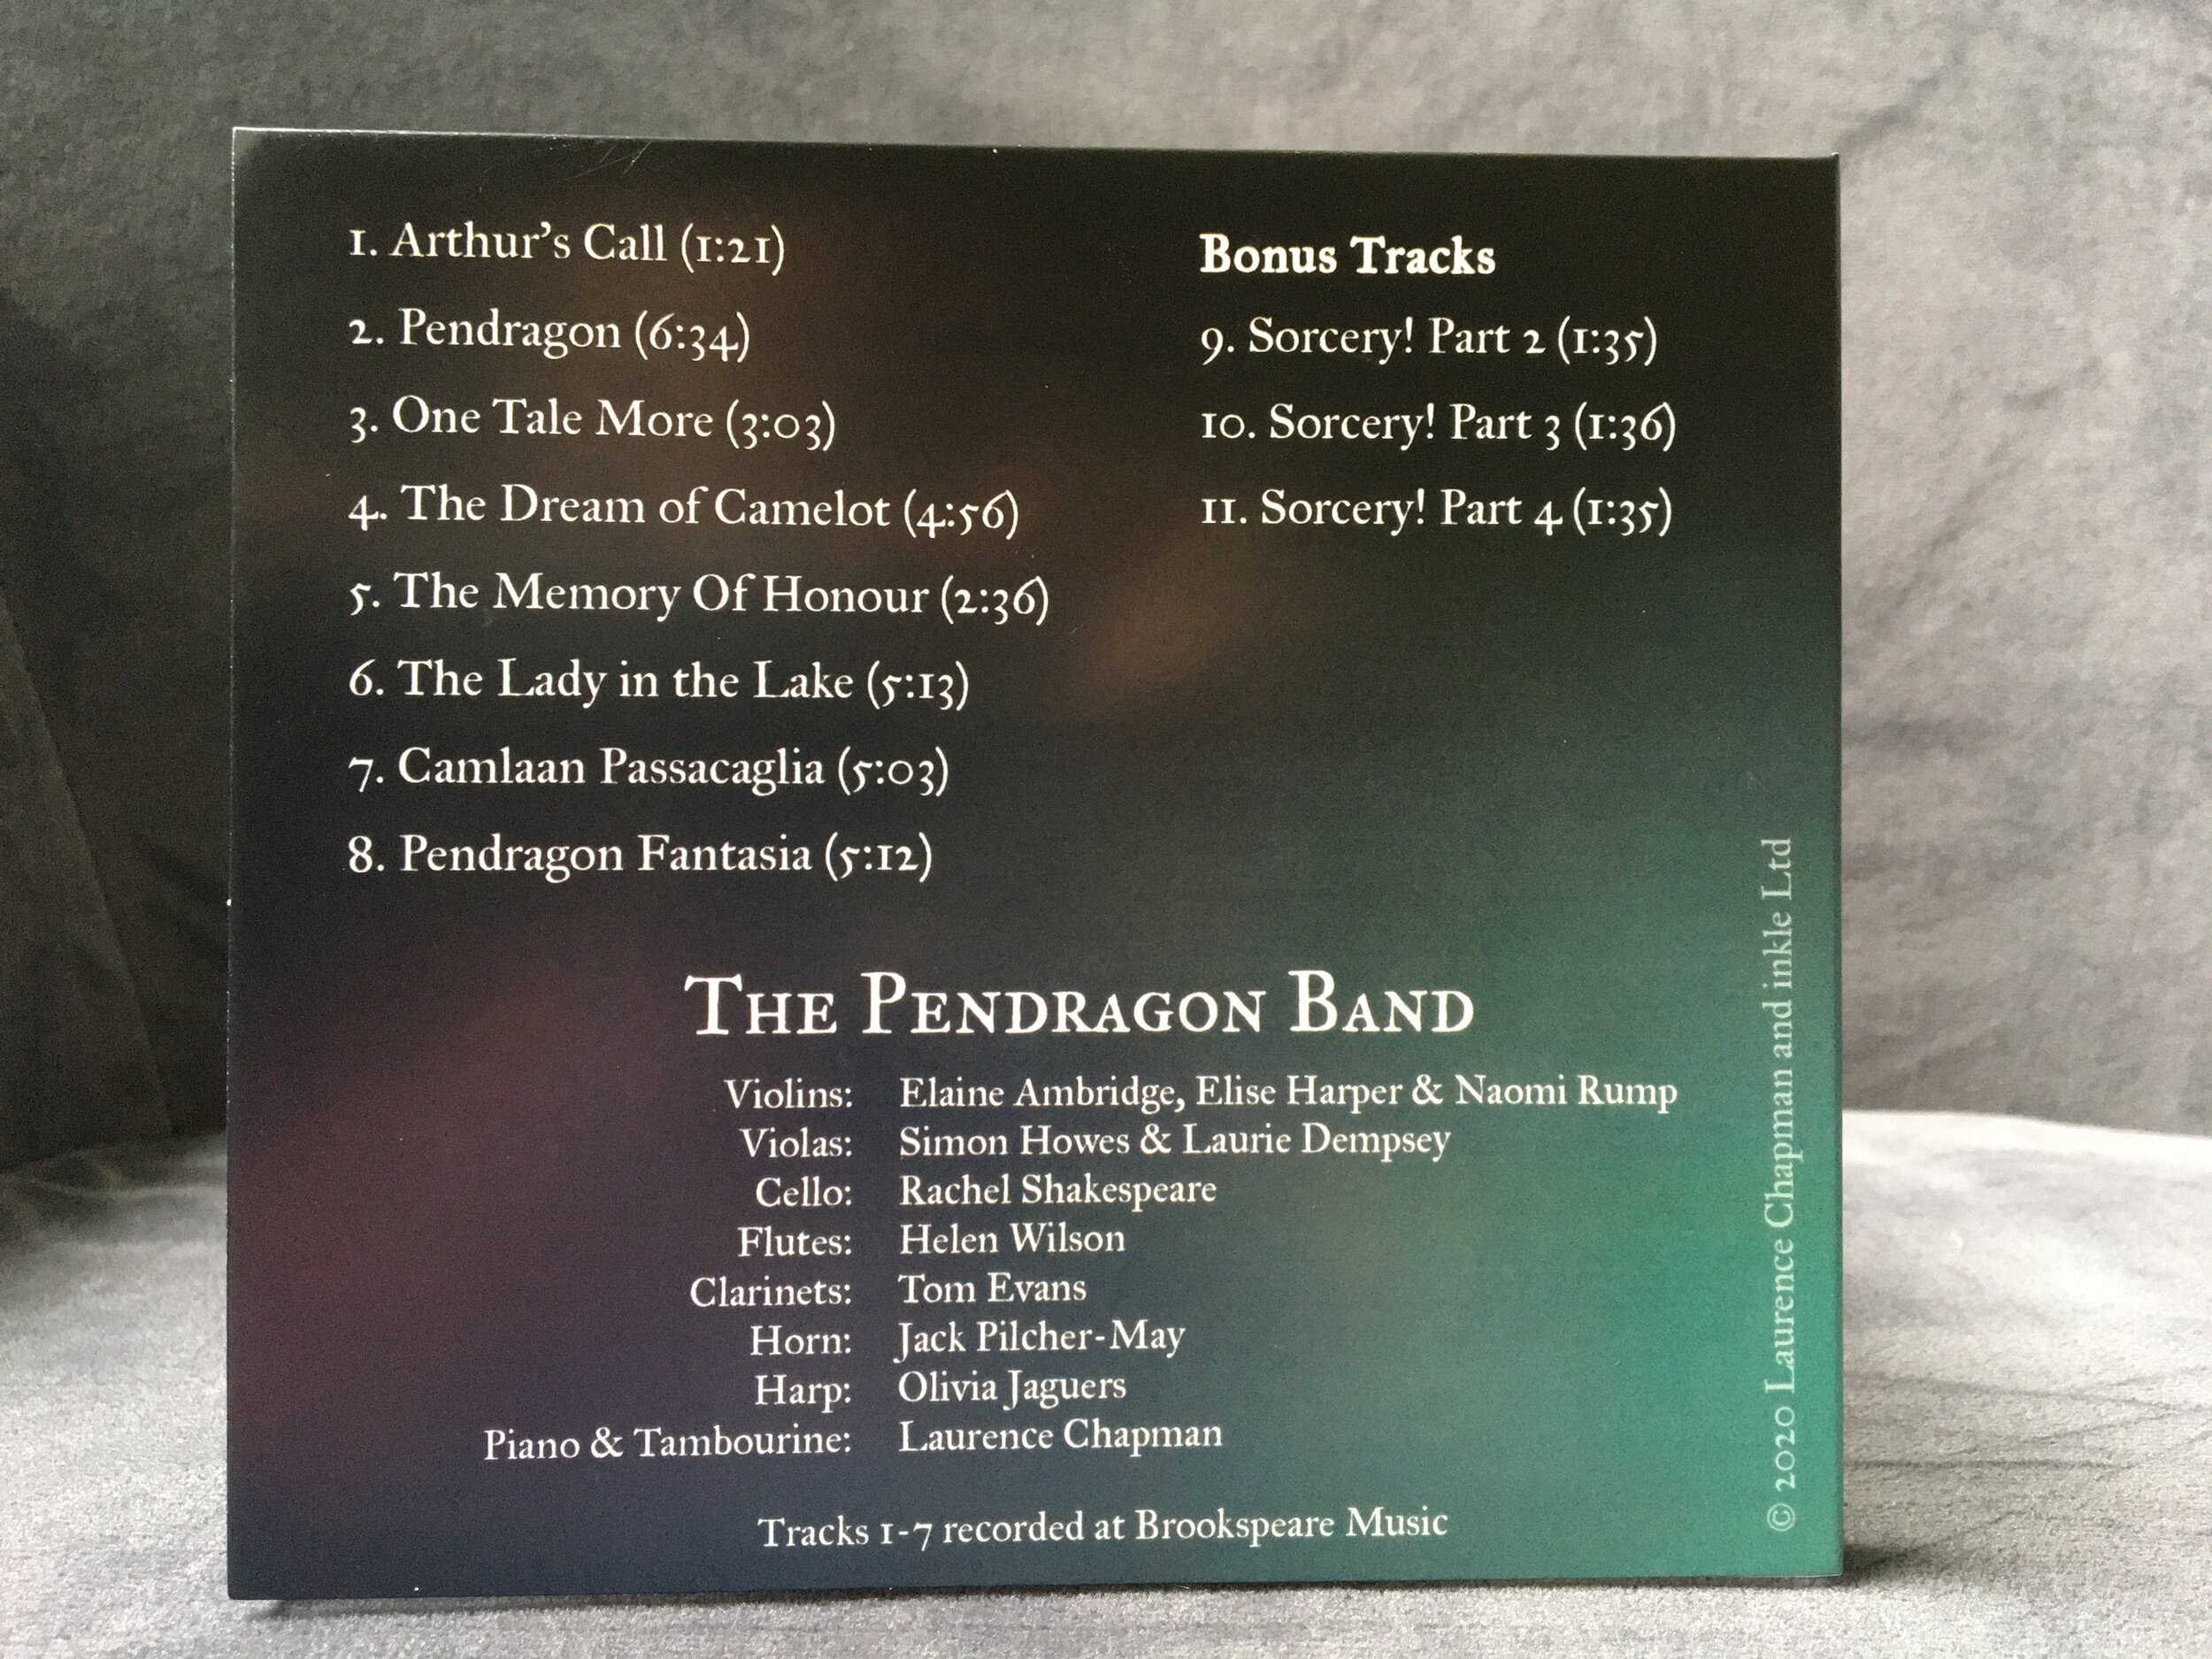 Reverse of CD cover